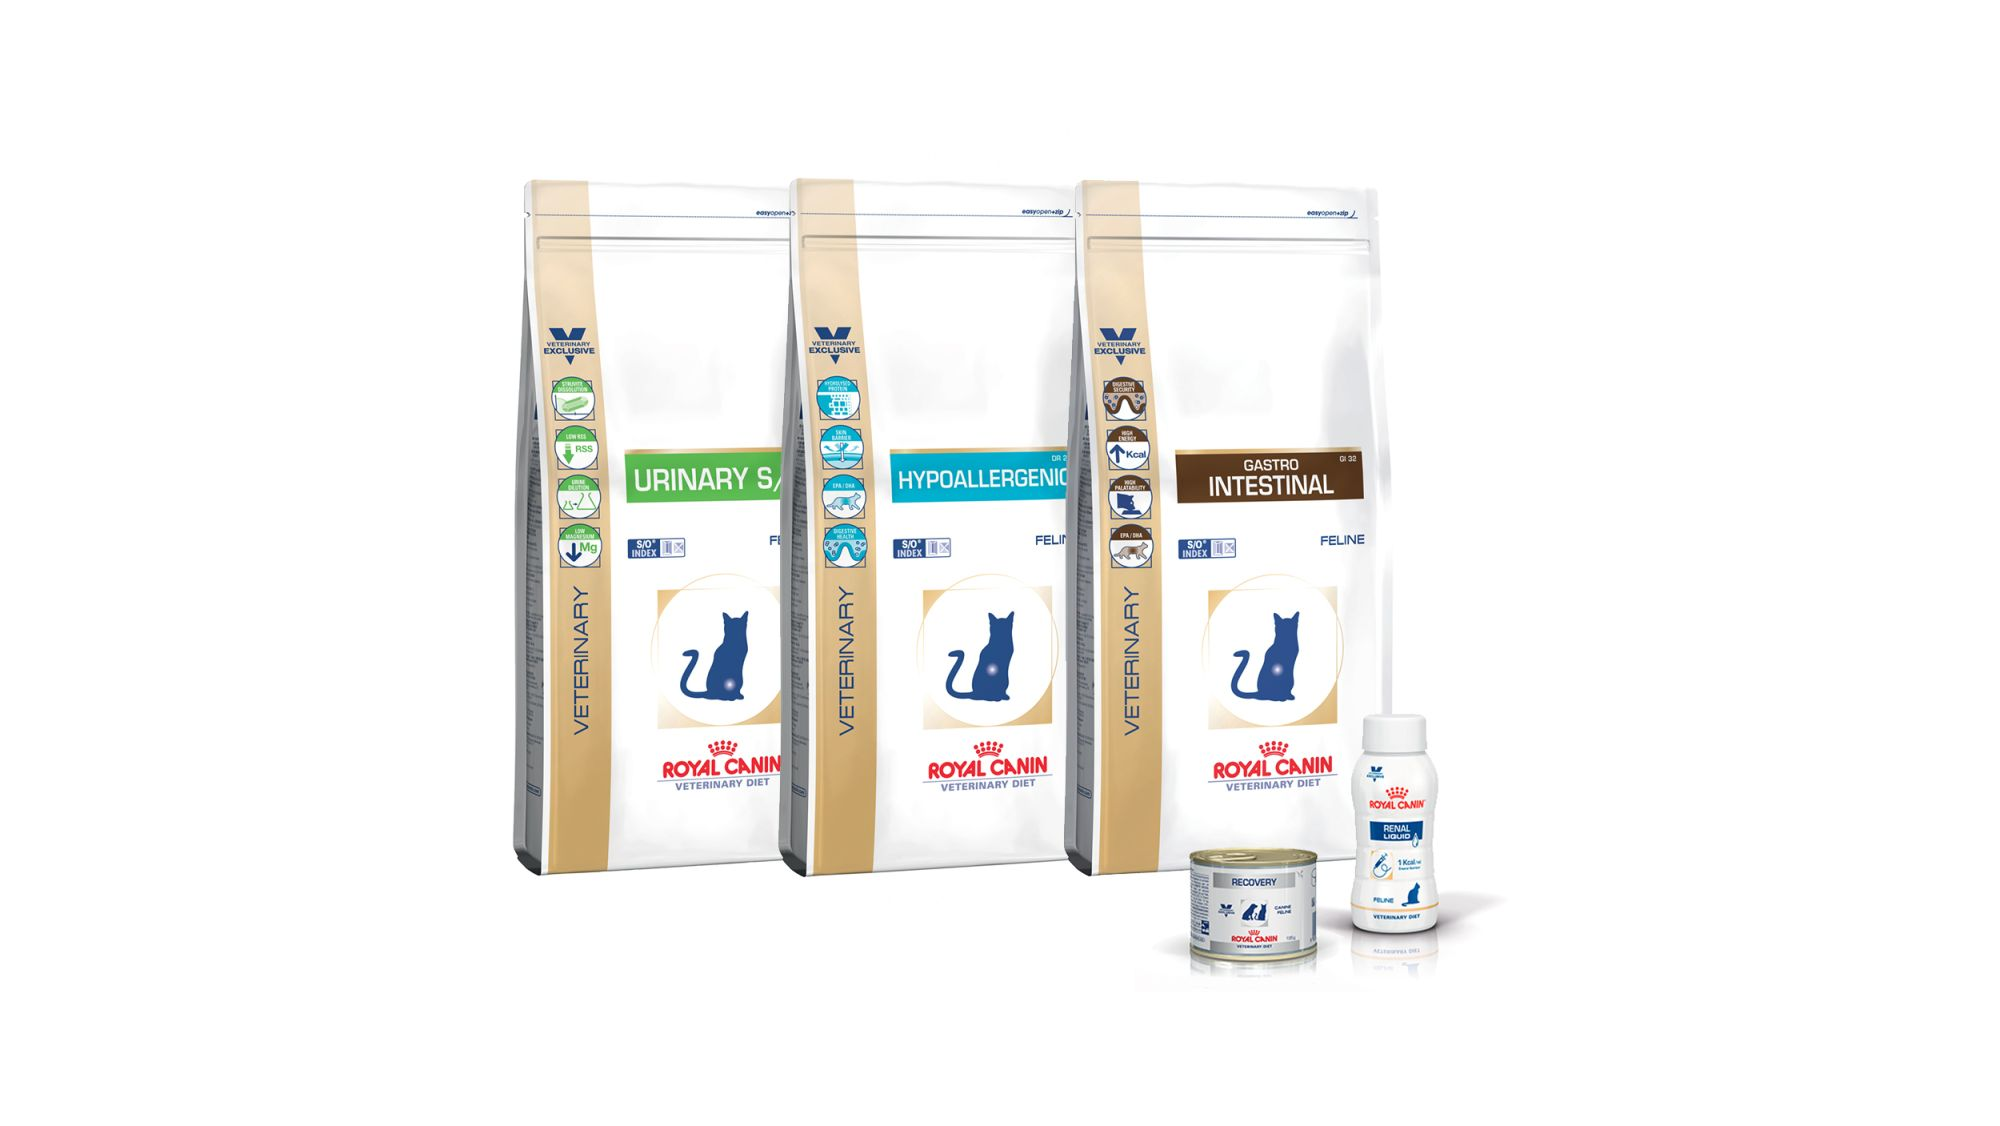 Tailored nutrition Vet products